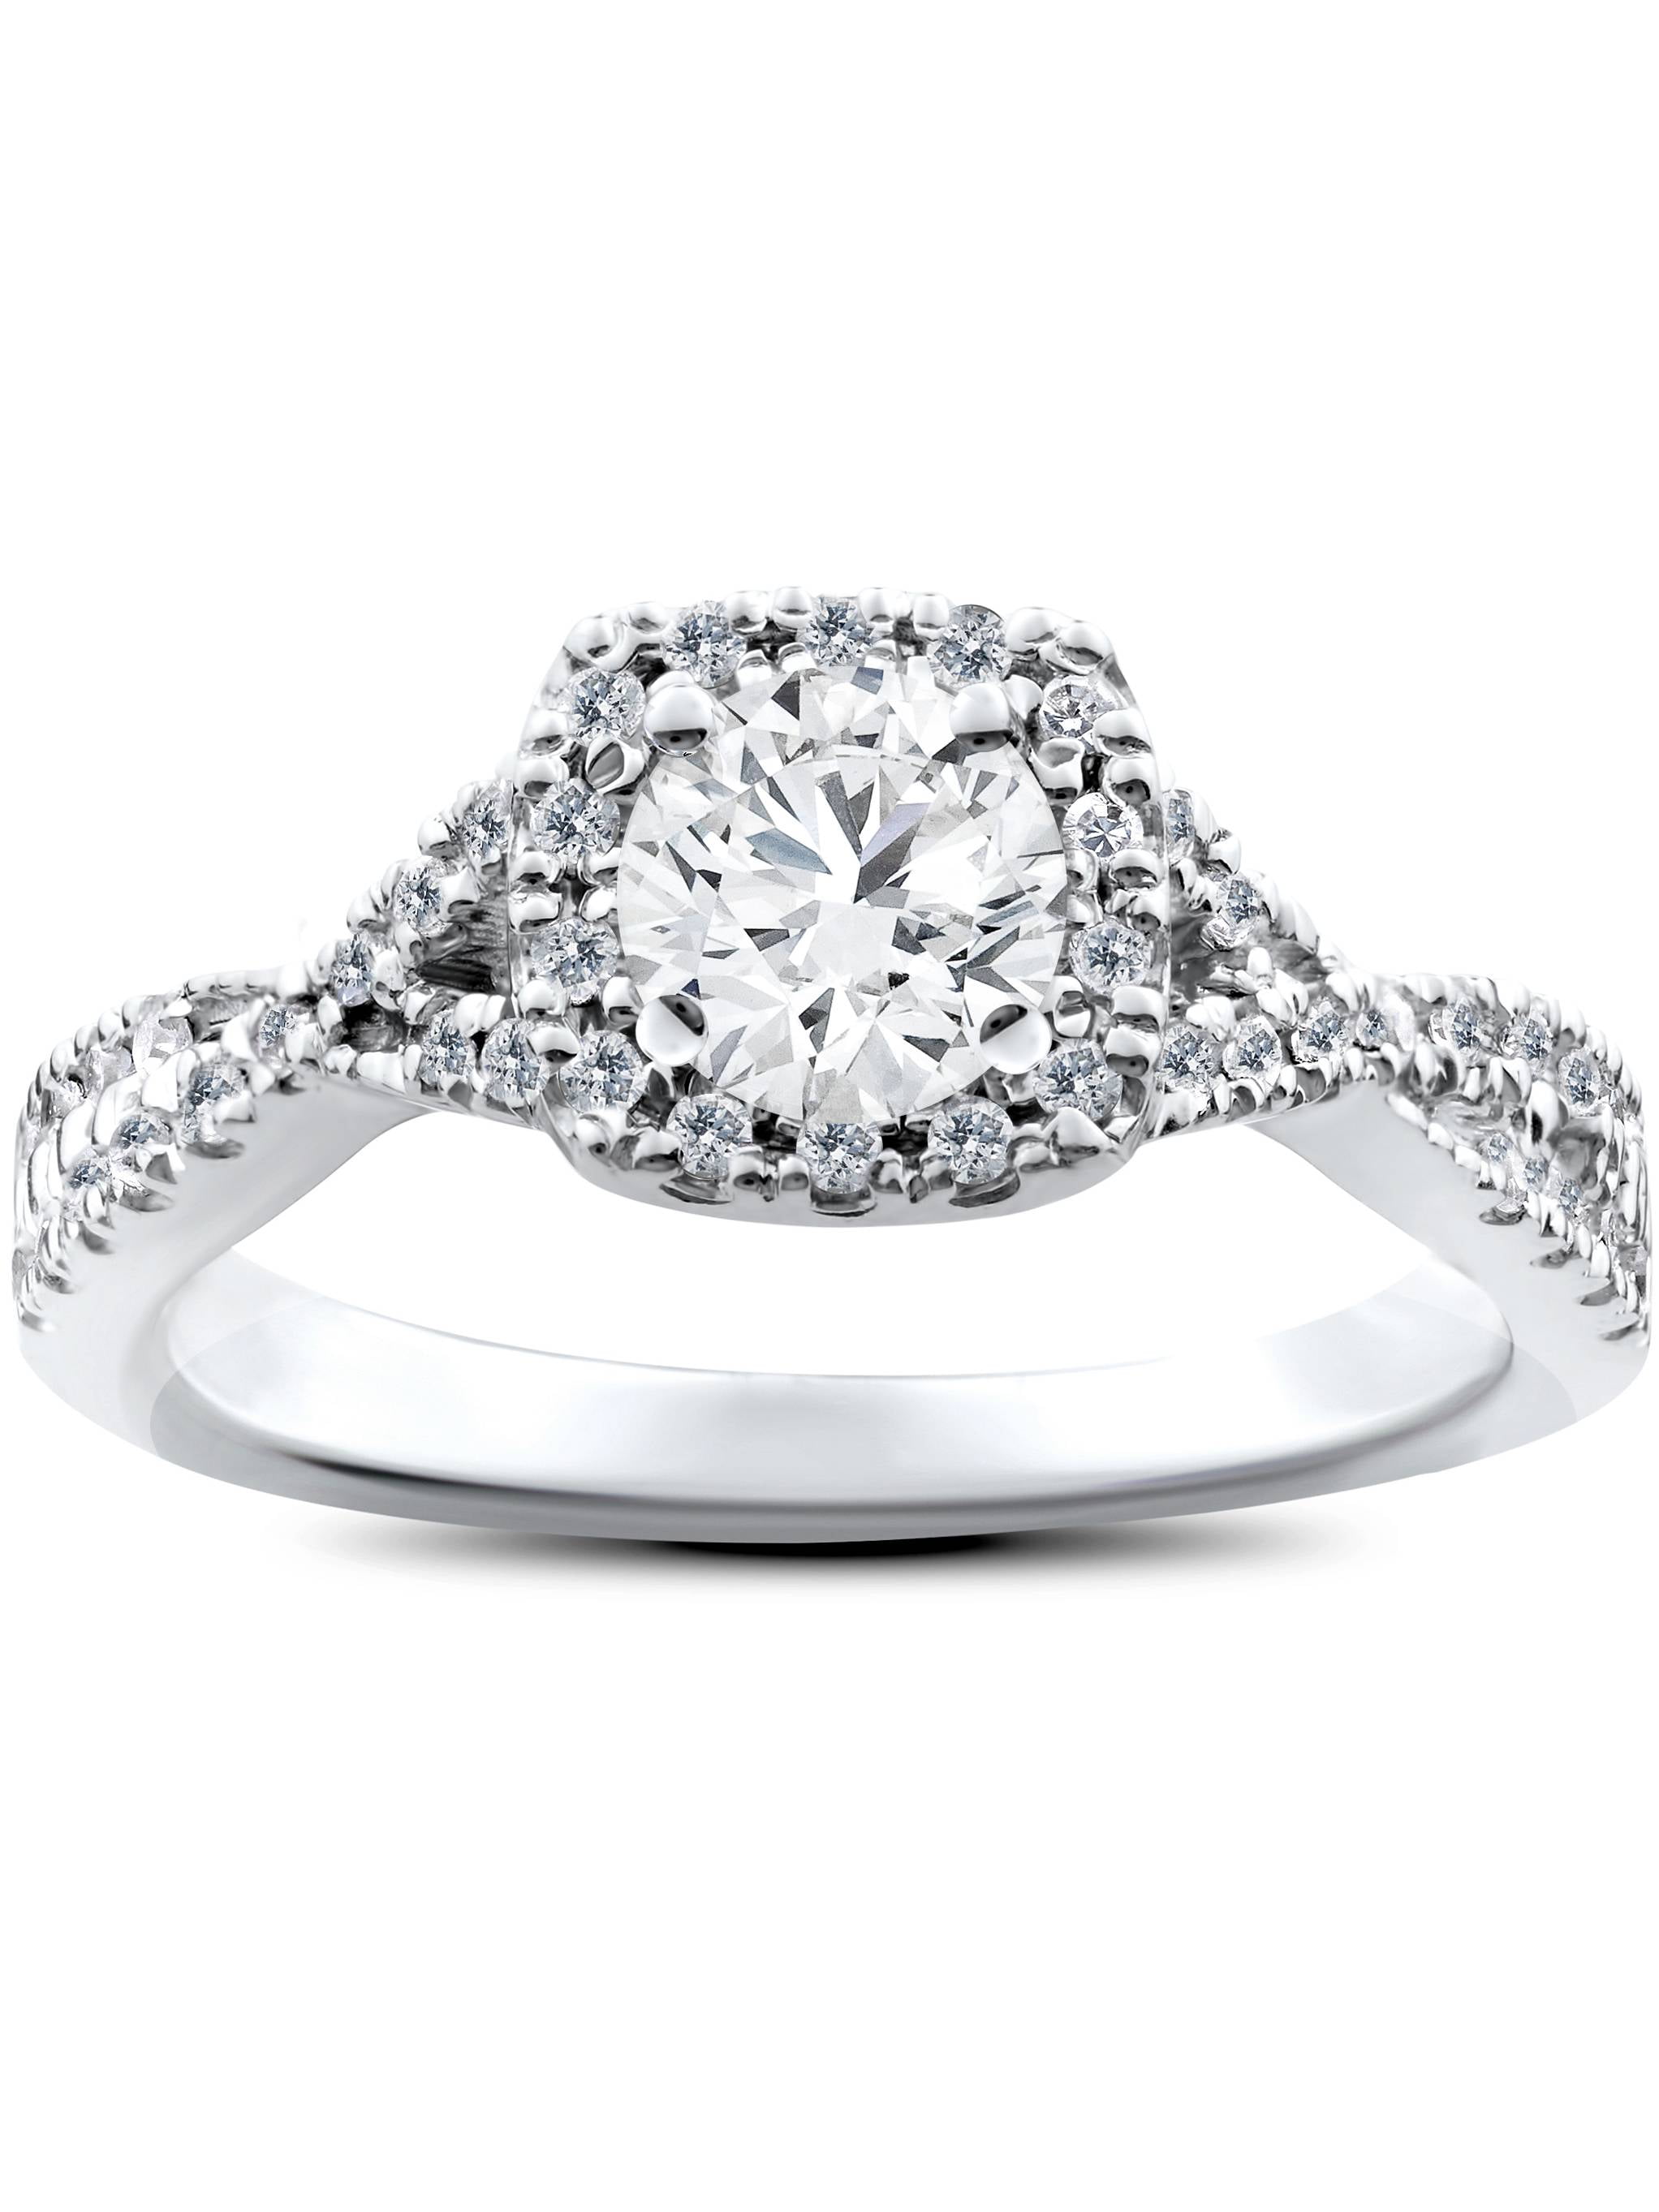 Details about   3.00ct White Oval and Round Cut Diamond Halo Engagement Ring 925 Sterling Silver 